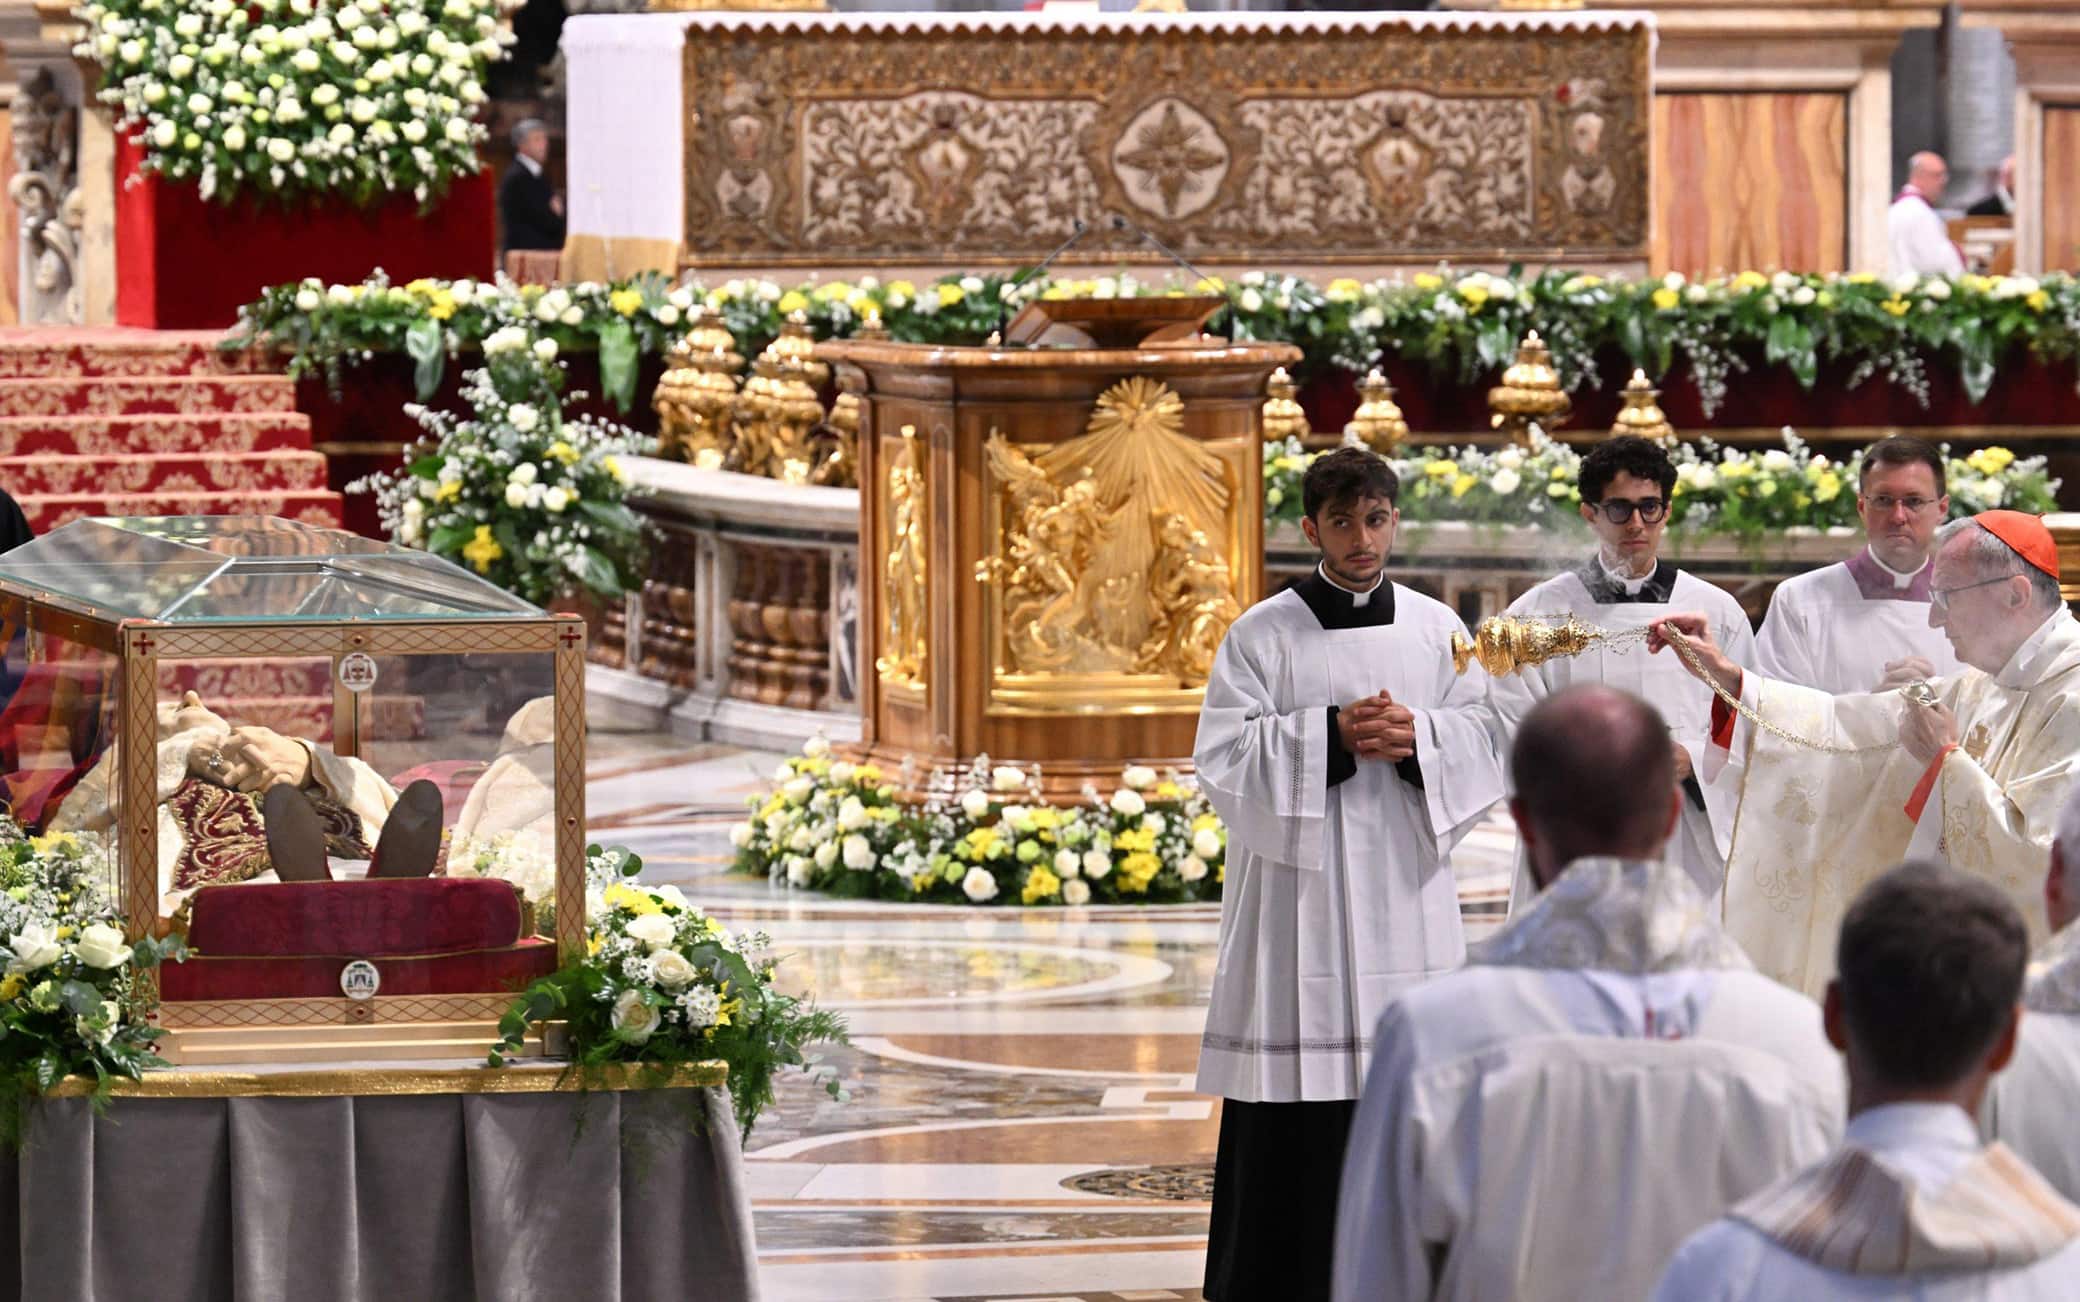 Vatican Secretary of State, Cardinal Parolin, blesses the shrine with the remains of Pope John XXIII, as Pope Francis presides over a Mass in Saint Peter’s Basilica for the 60th anniversary of the Second Vatican Council. Vatican City, 11 October 2022. ANSA/CLAUDIO PERI